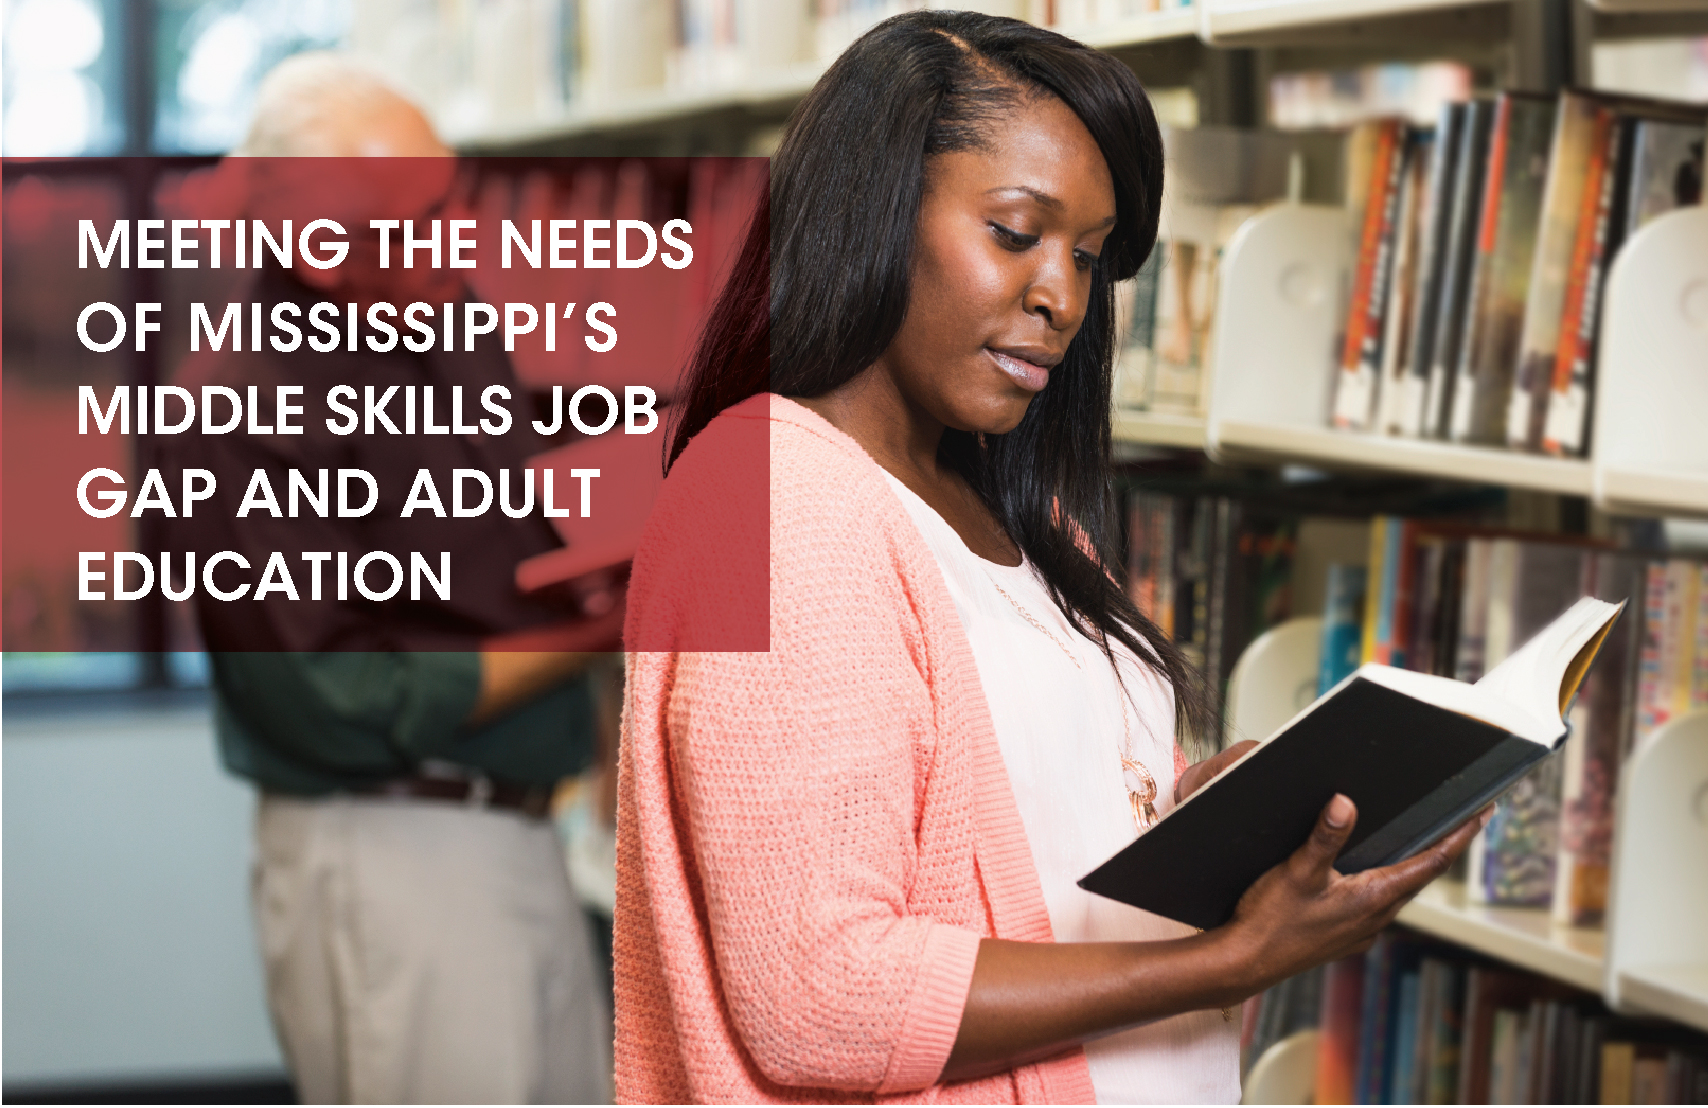 410x266_Meeting the needs of Mississippi¹s Middle Skills Job Gap and Adult Education